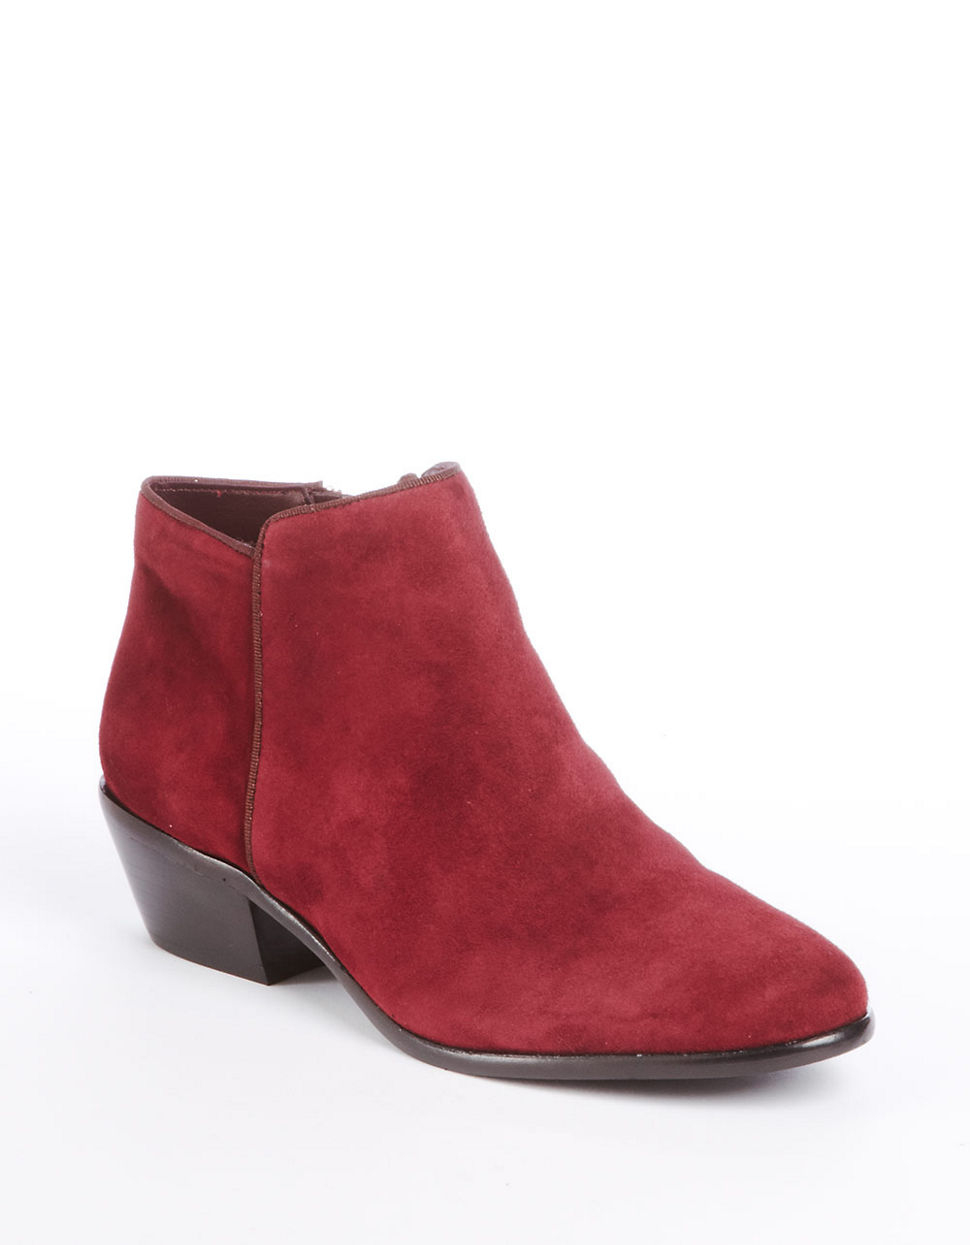 Sam Edelman Petty Suede Ankle Boots in Red | Lyst